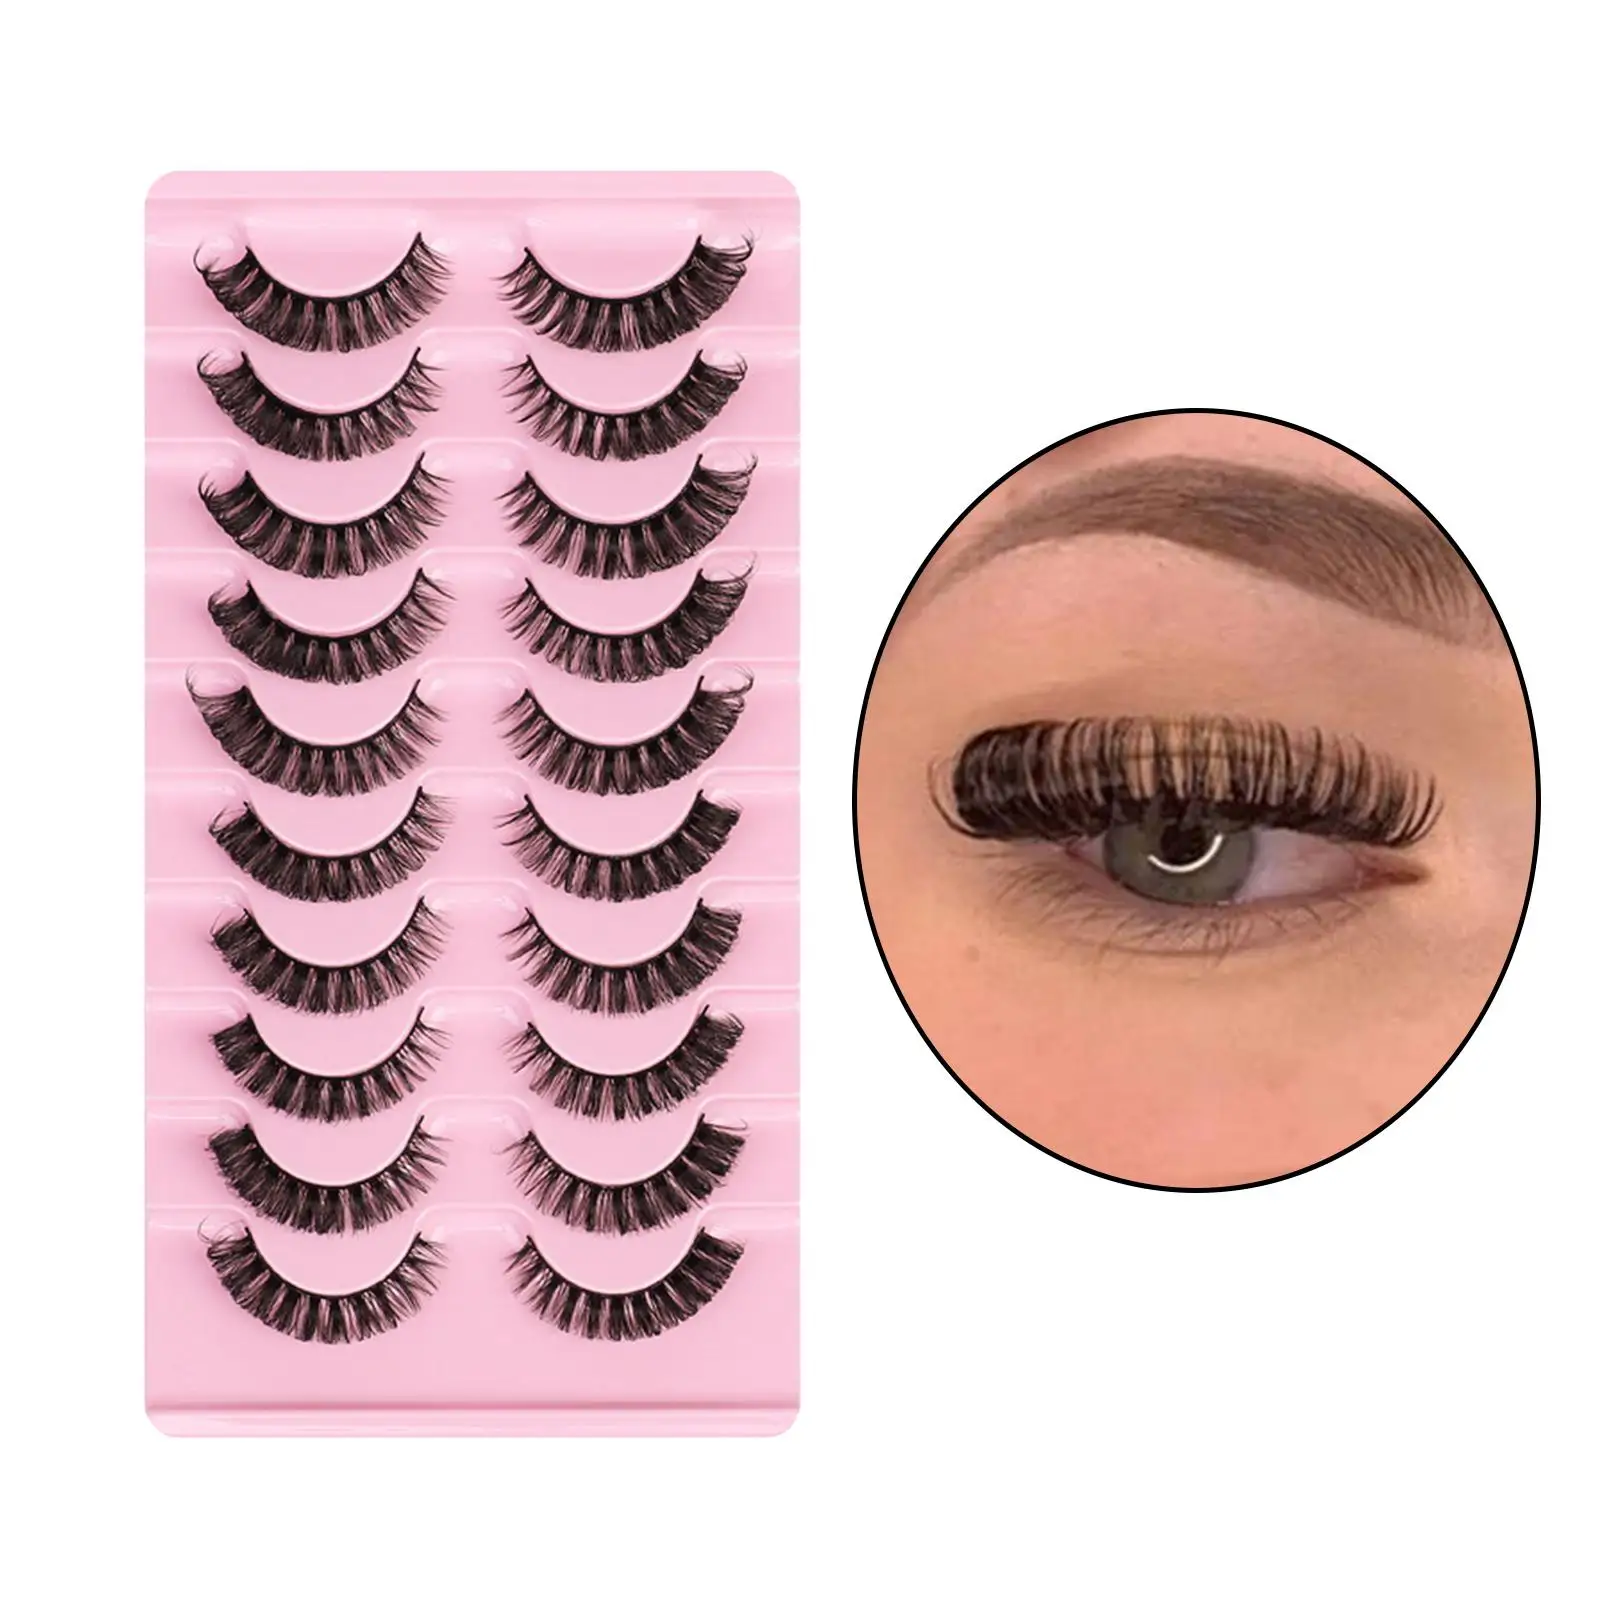 10 Pairs Russian Strip Lashes DD Curl Curly Eye Lashes Natural Doll Look Lasted Hot Style Lightweight Popular Accessories 